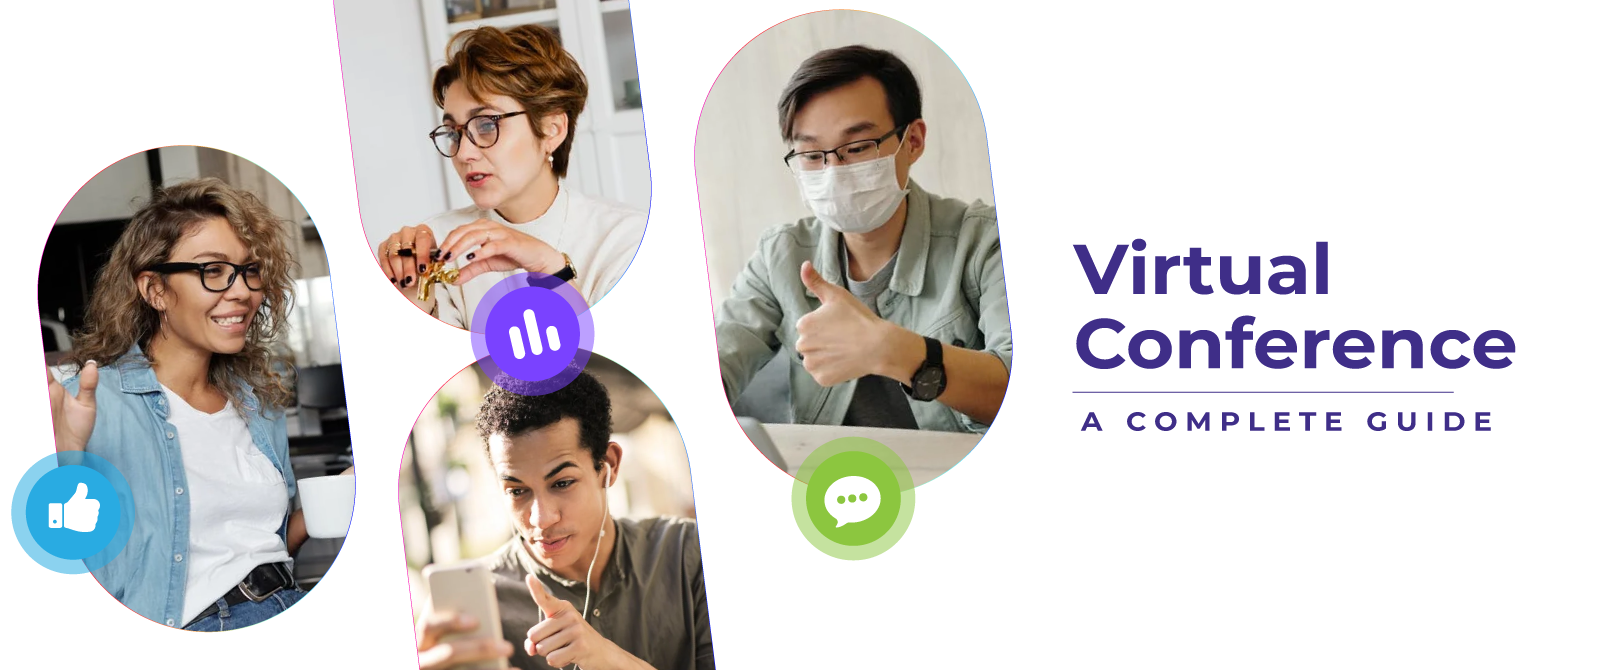 Virtual Conference – A Complete Guide